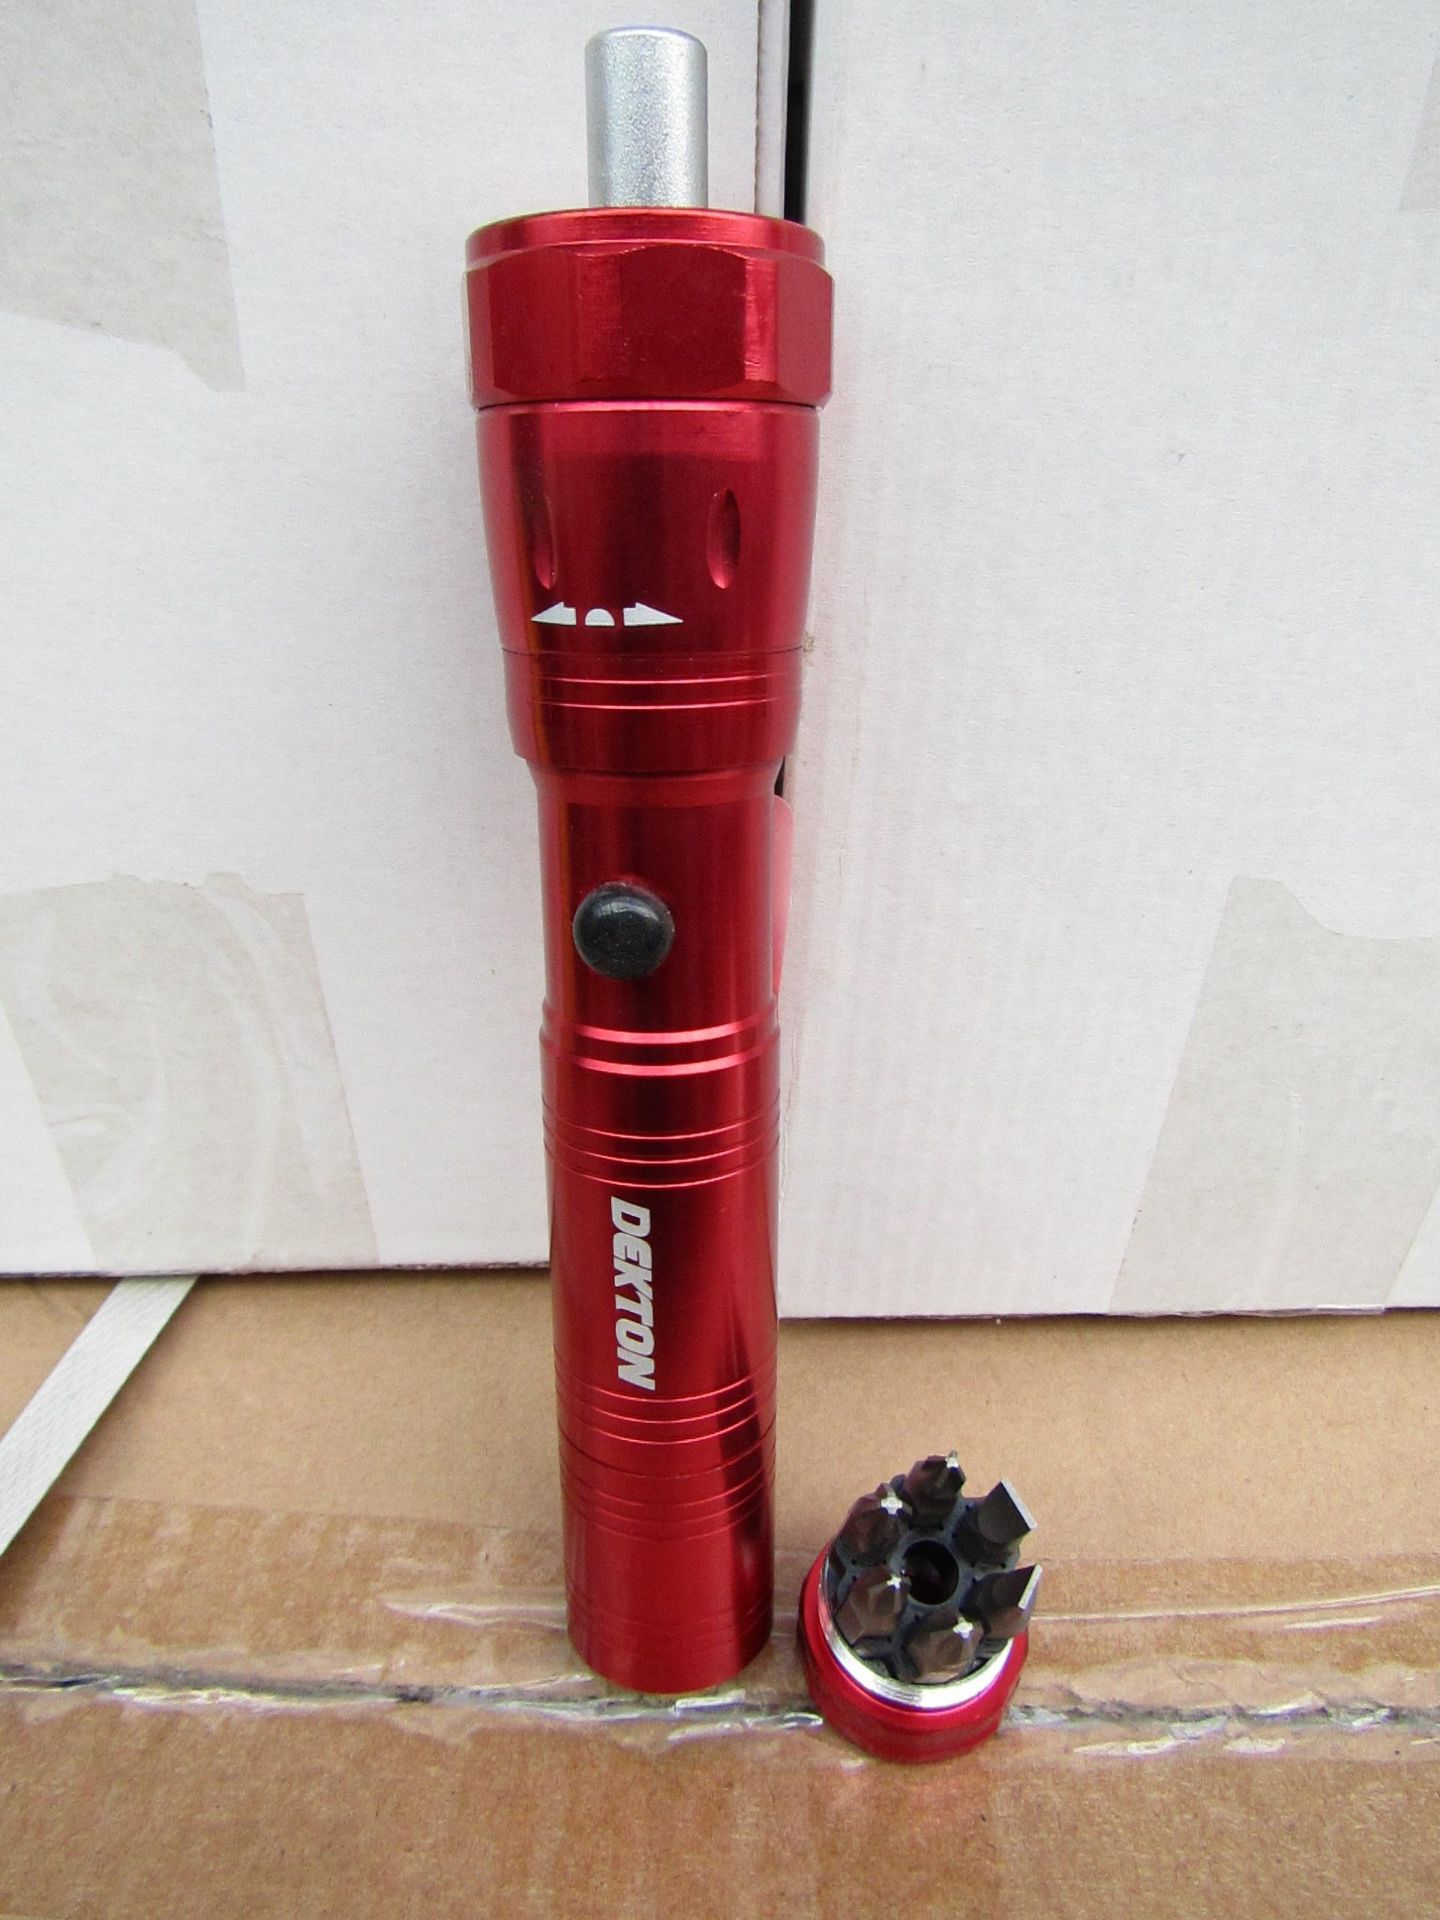 1x Dekton 6 LED ratchet torch with 6 Screw driver Bits in the base, new